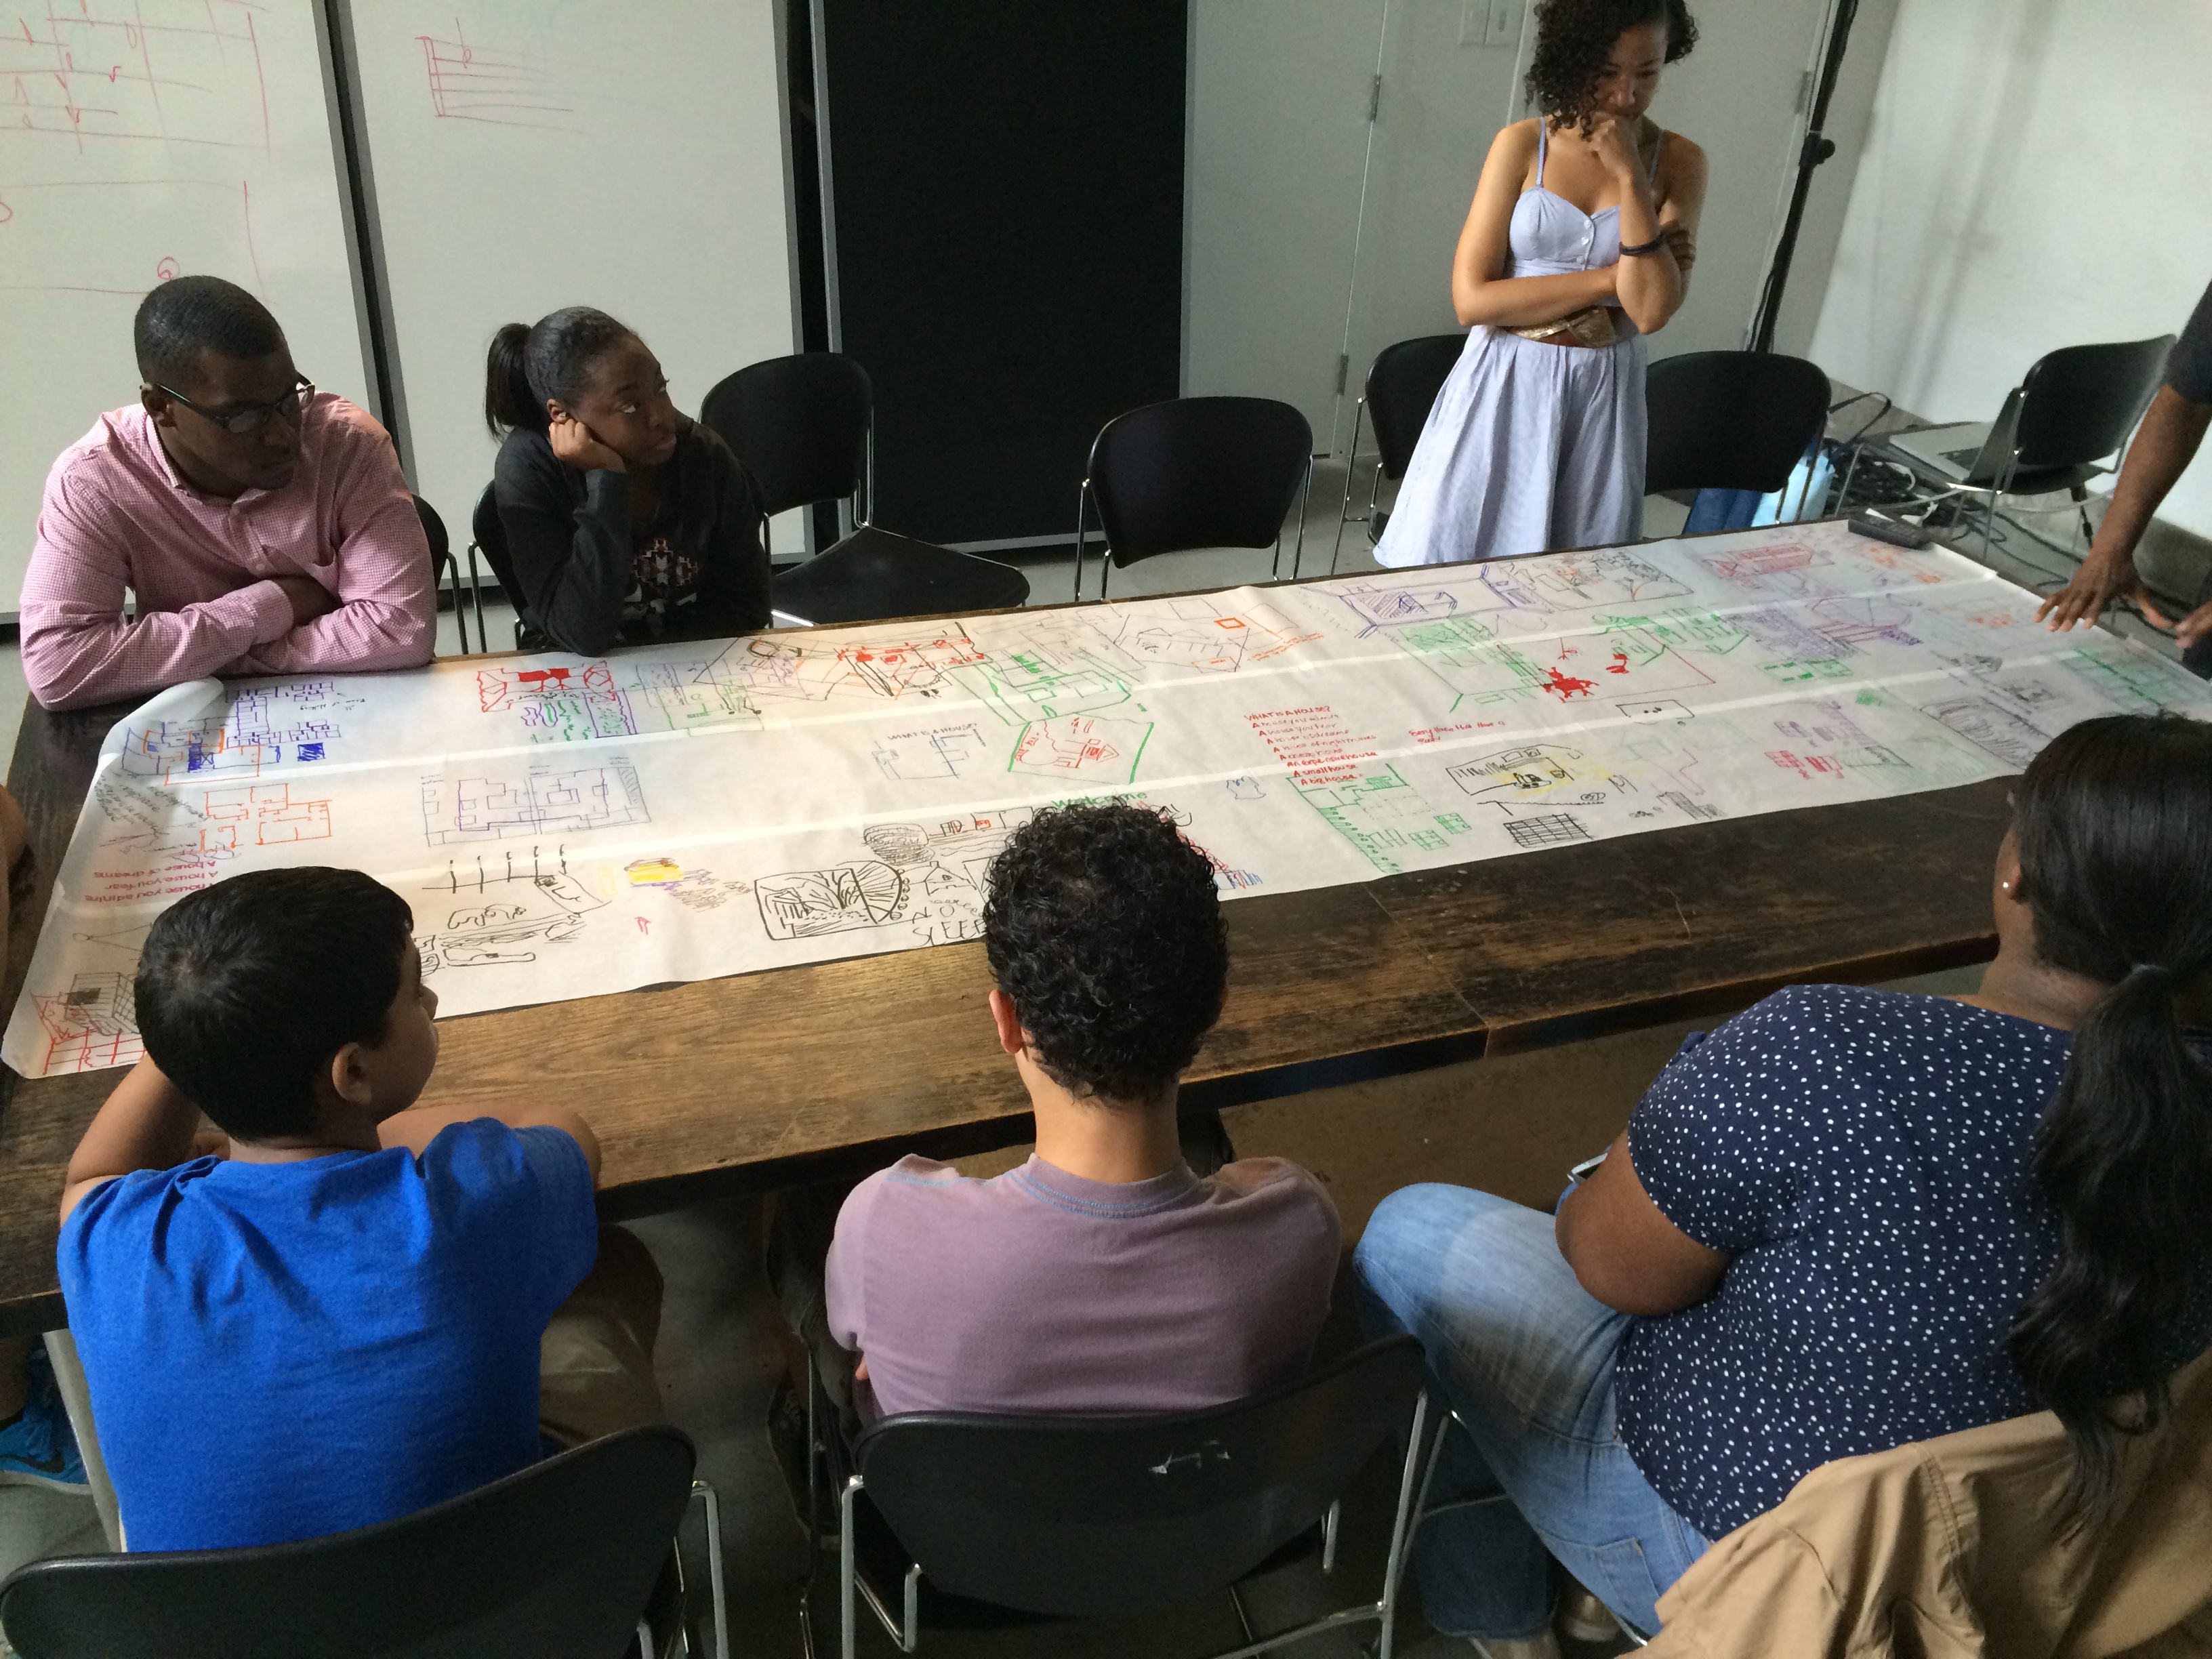 Students gathered around a table over a drawing